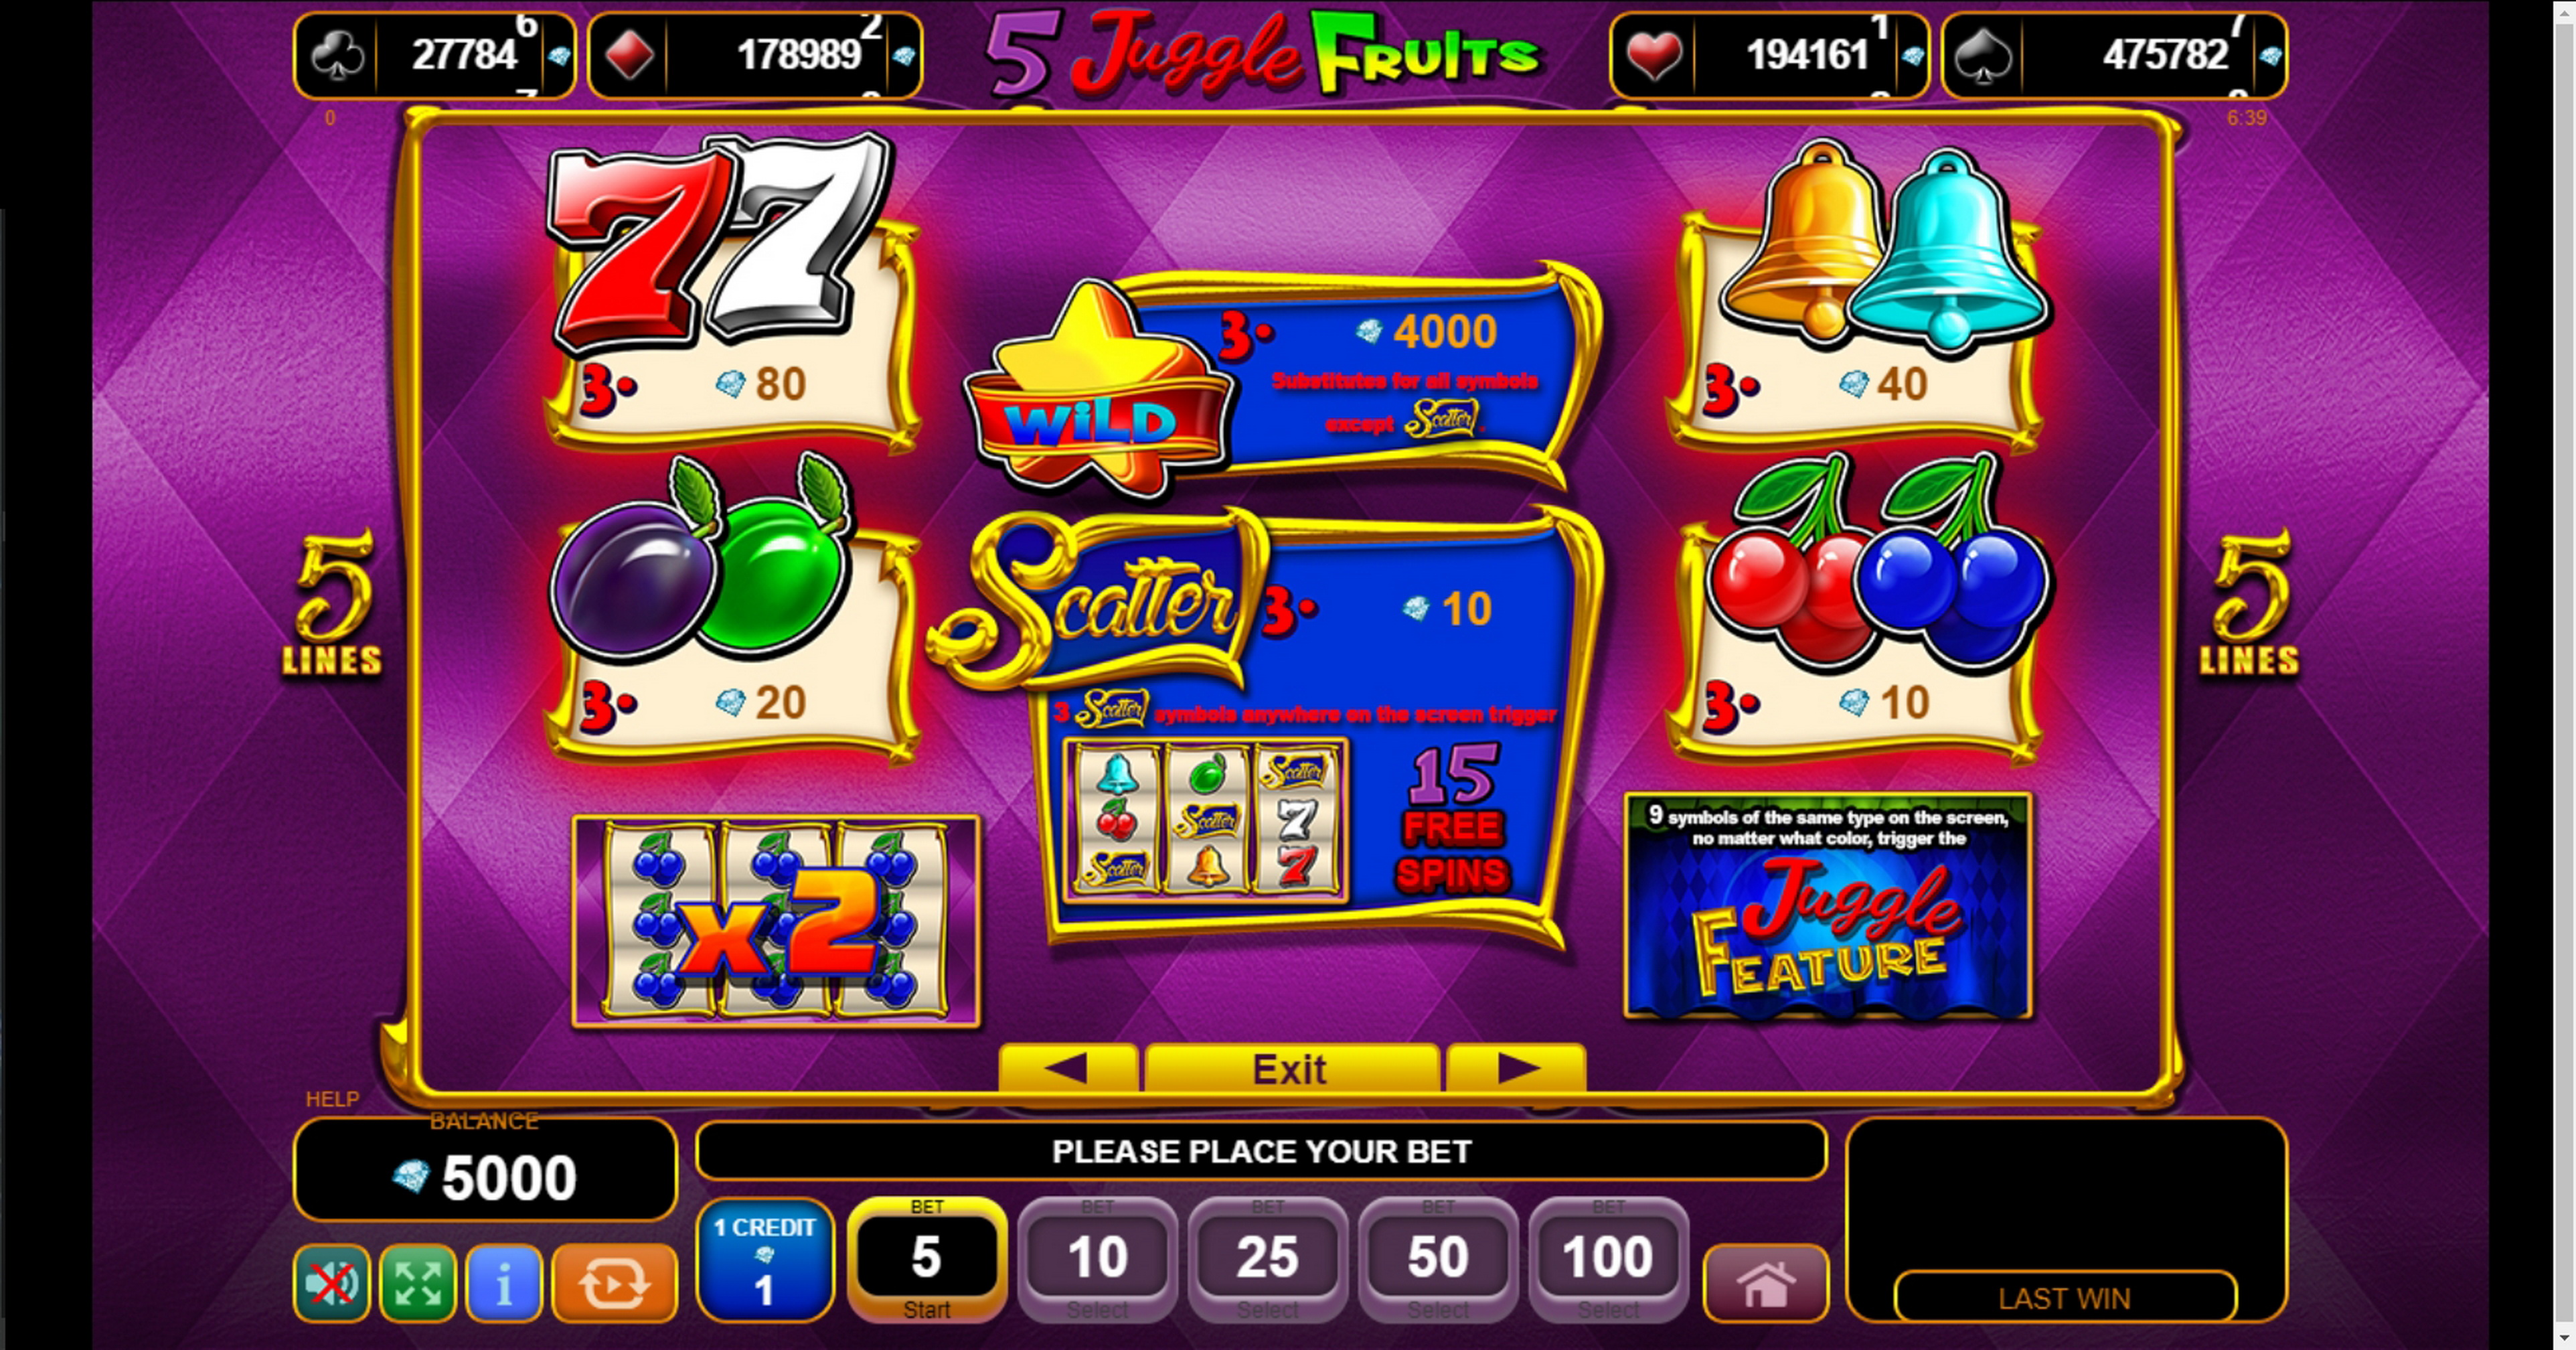 Info of 5 Juggle Fruits Slot Game by EGT